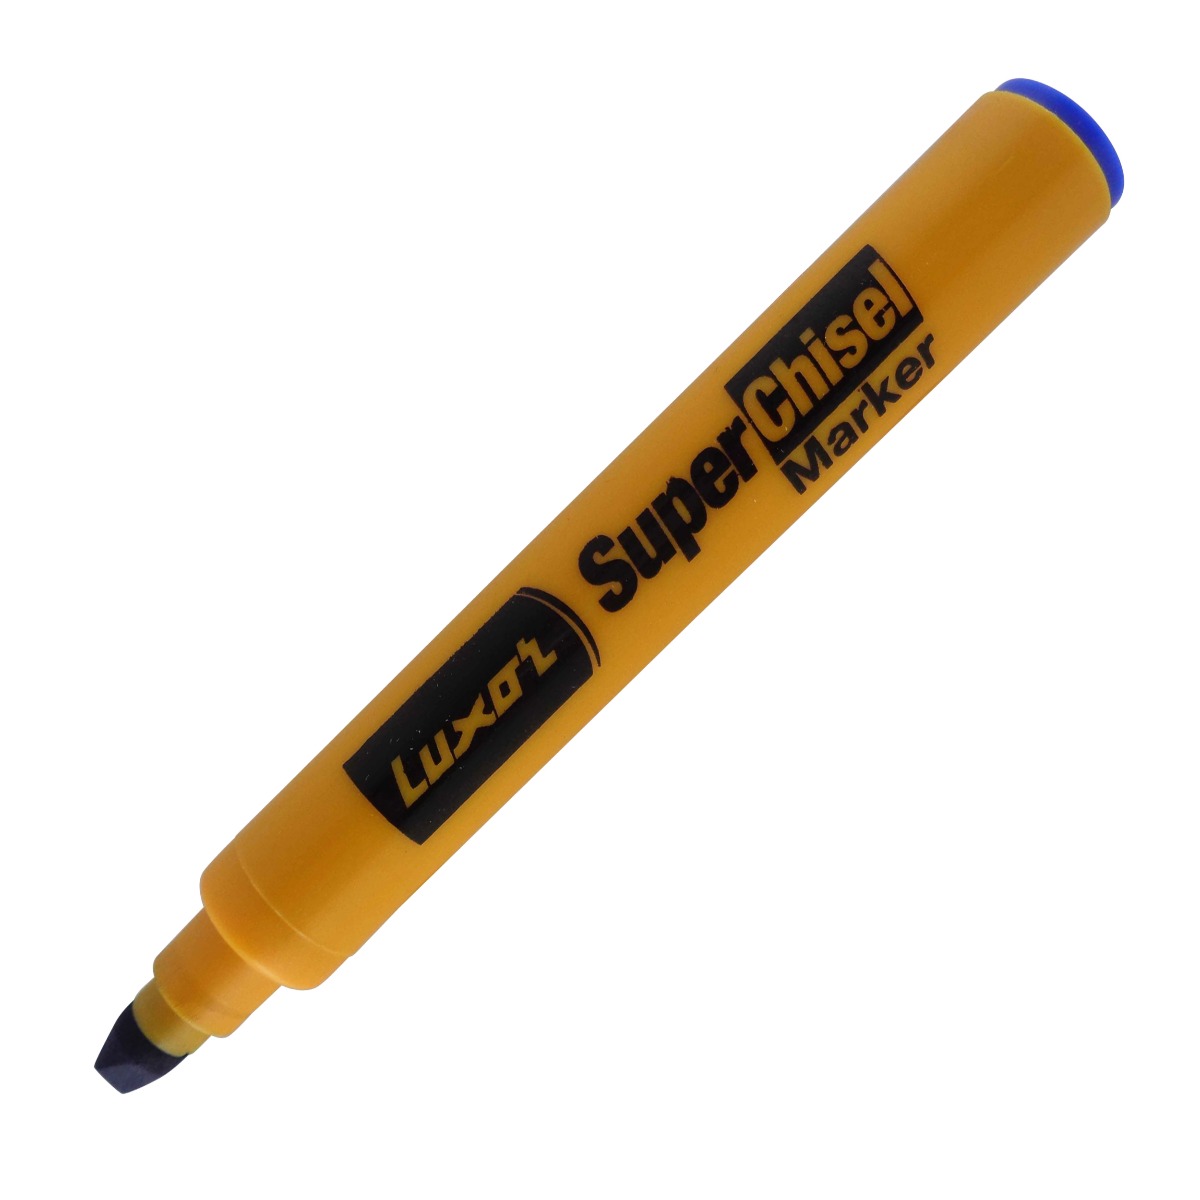 Luxor Model: 15098 Super chisel Yellow color body with Blue color cap with blue ink marker